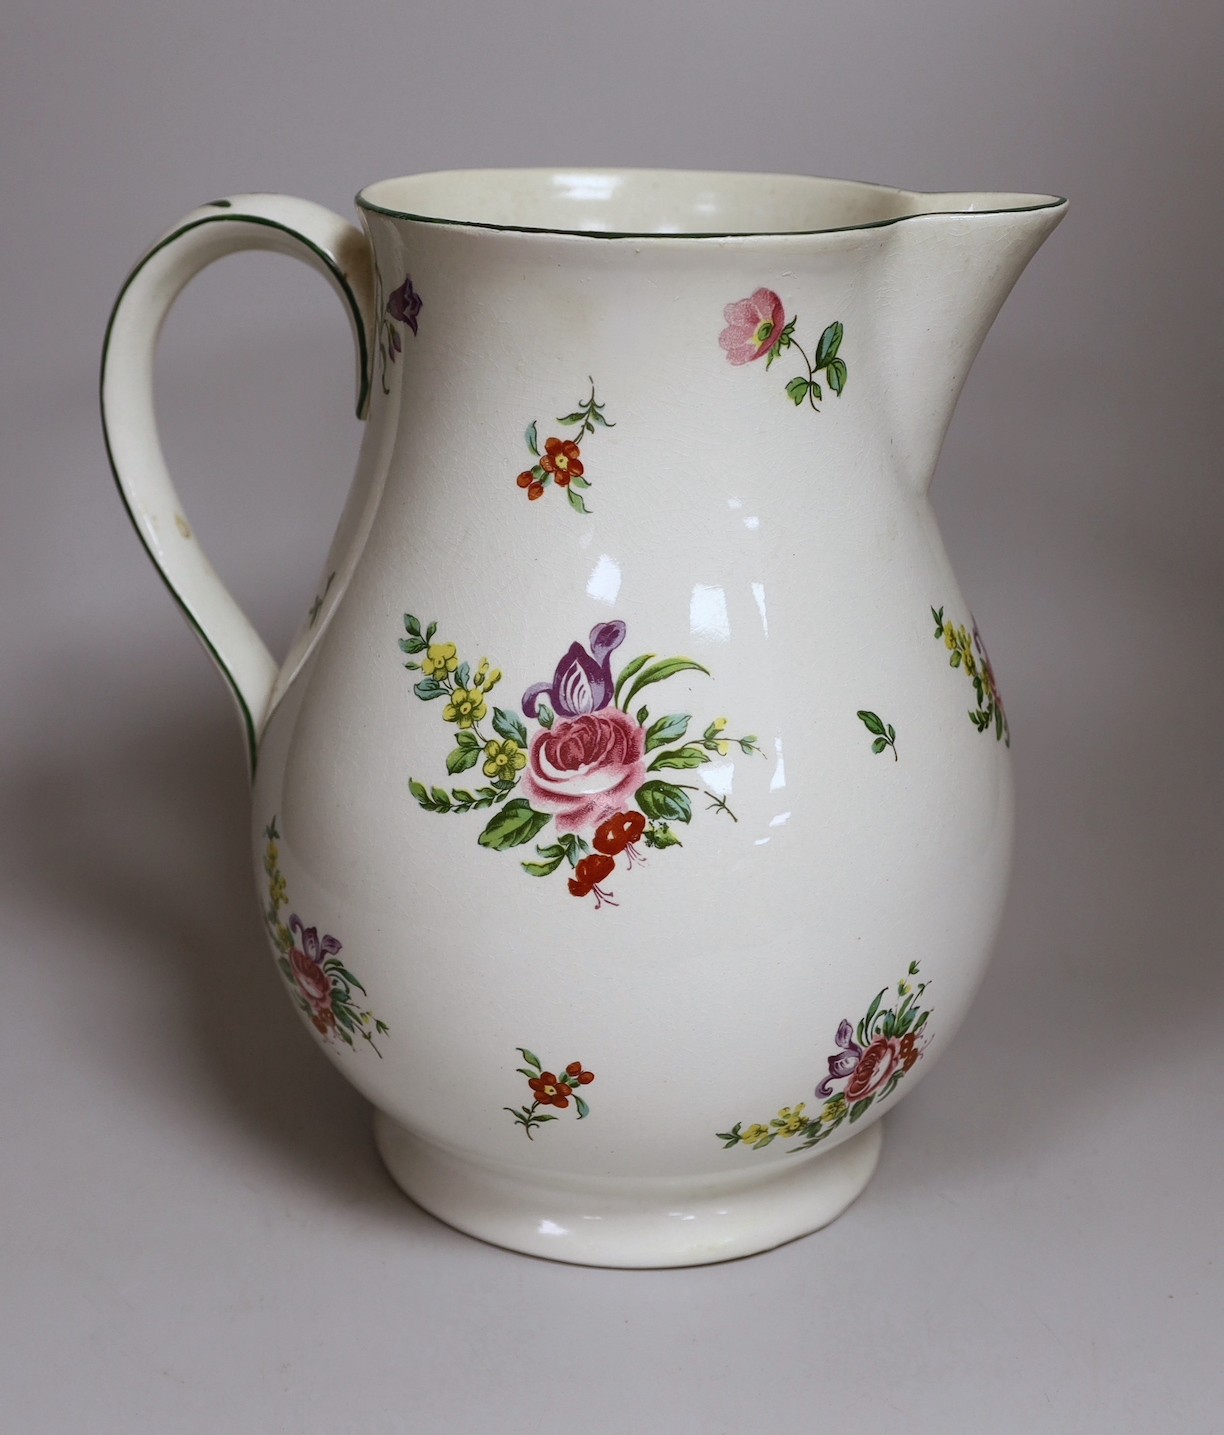 A Pountney jug, commemorating 100 years of the Bristol porcelain factory 1770 -1781, decorated